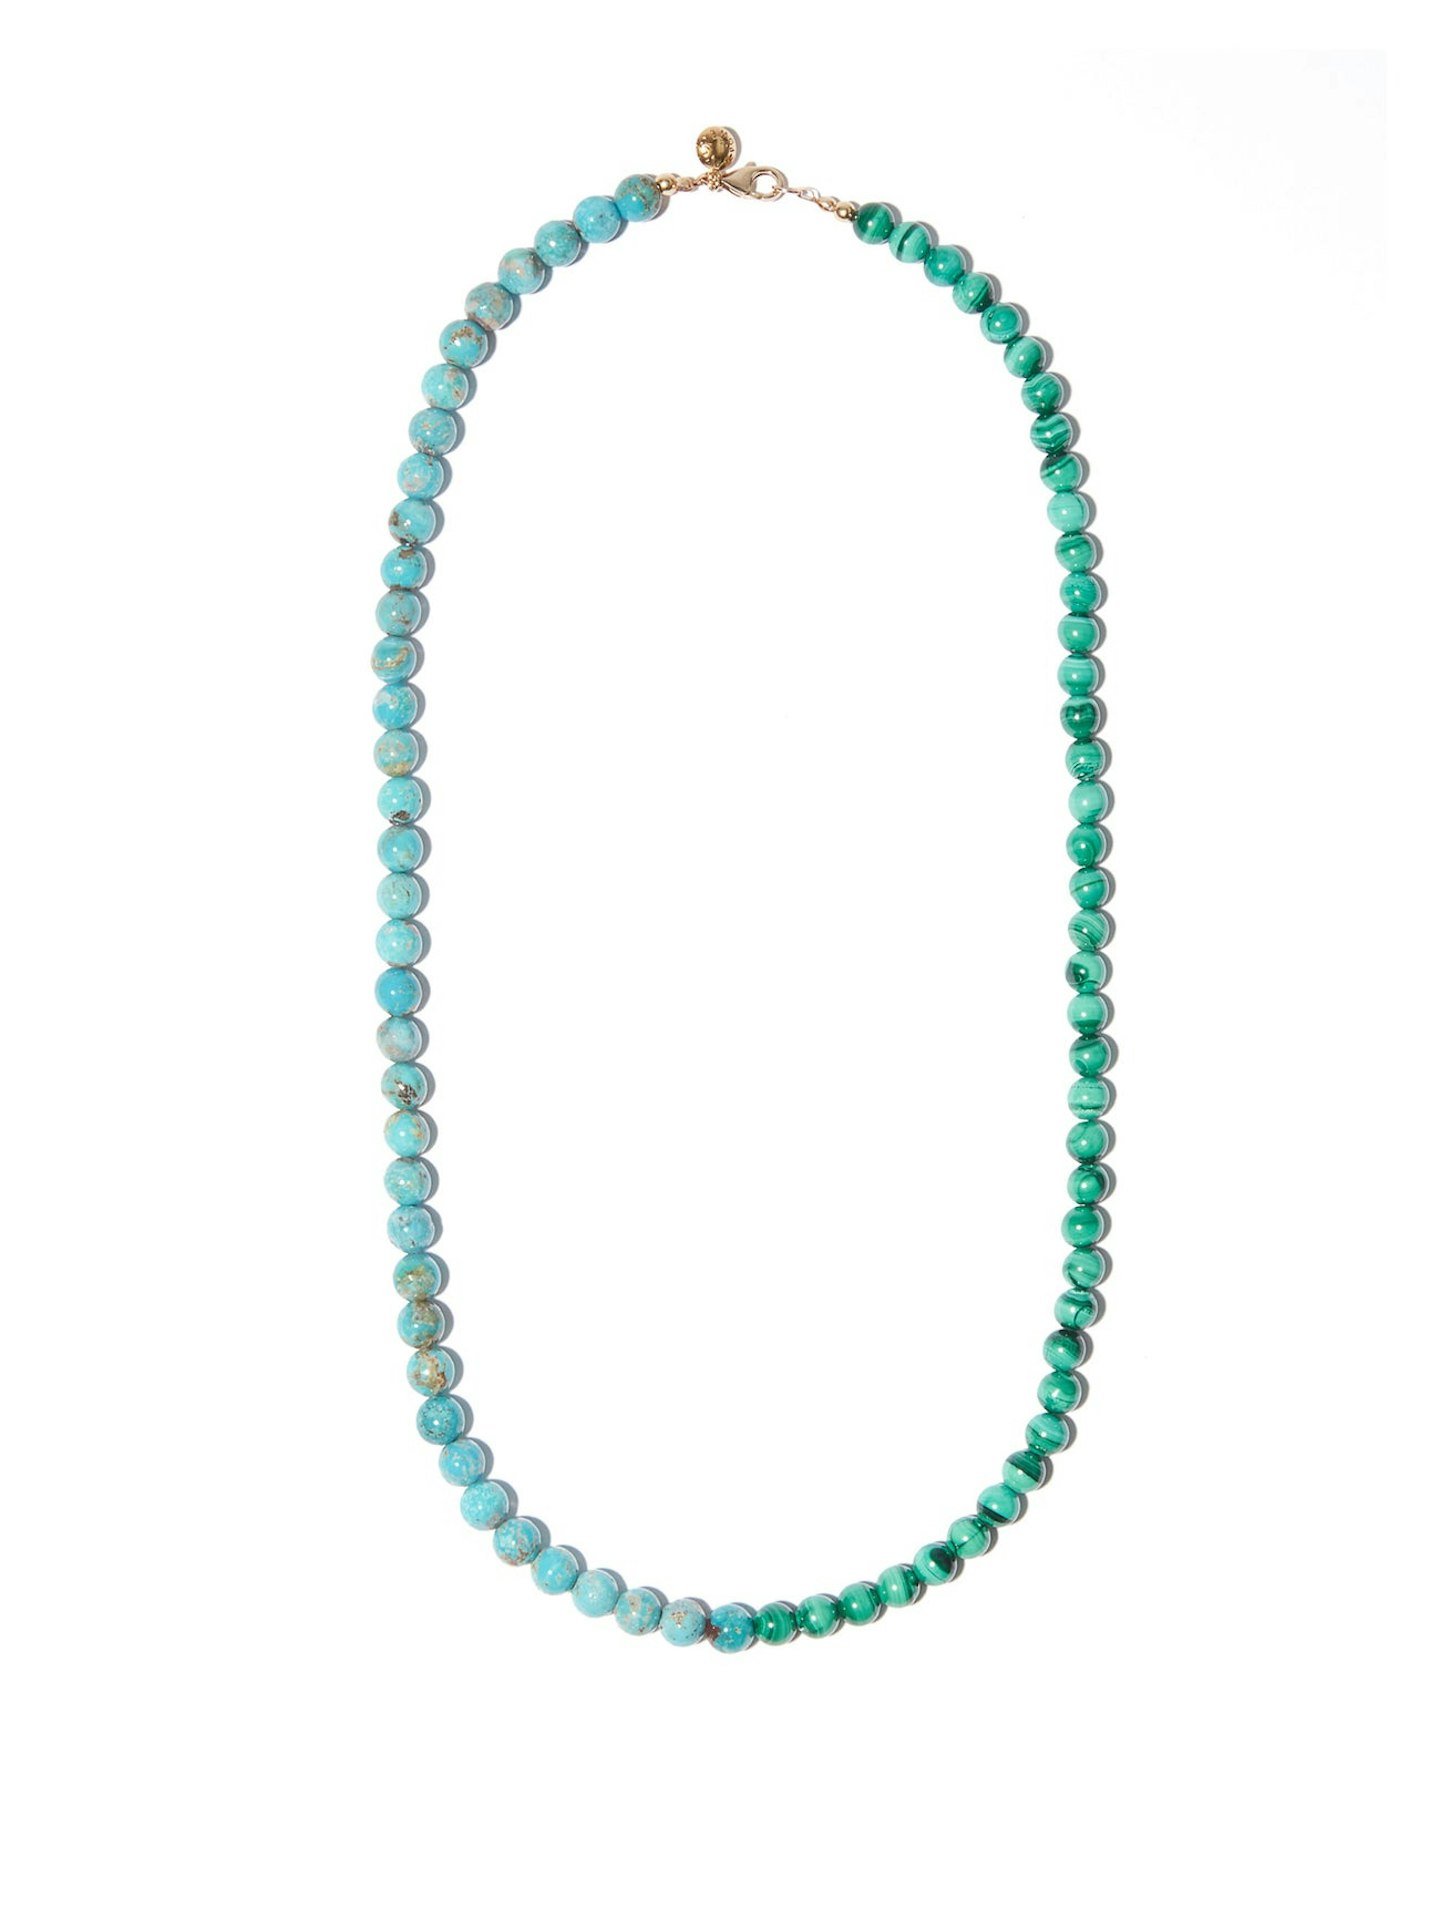 Fry Powers, Turquoise & Malachite 14kt Gold-Plated Necklace, £595